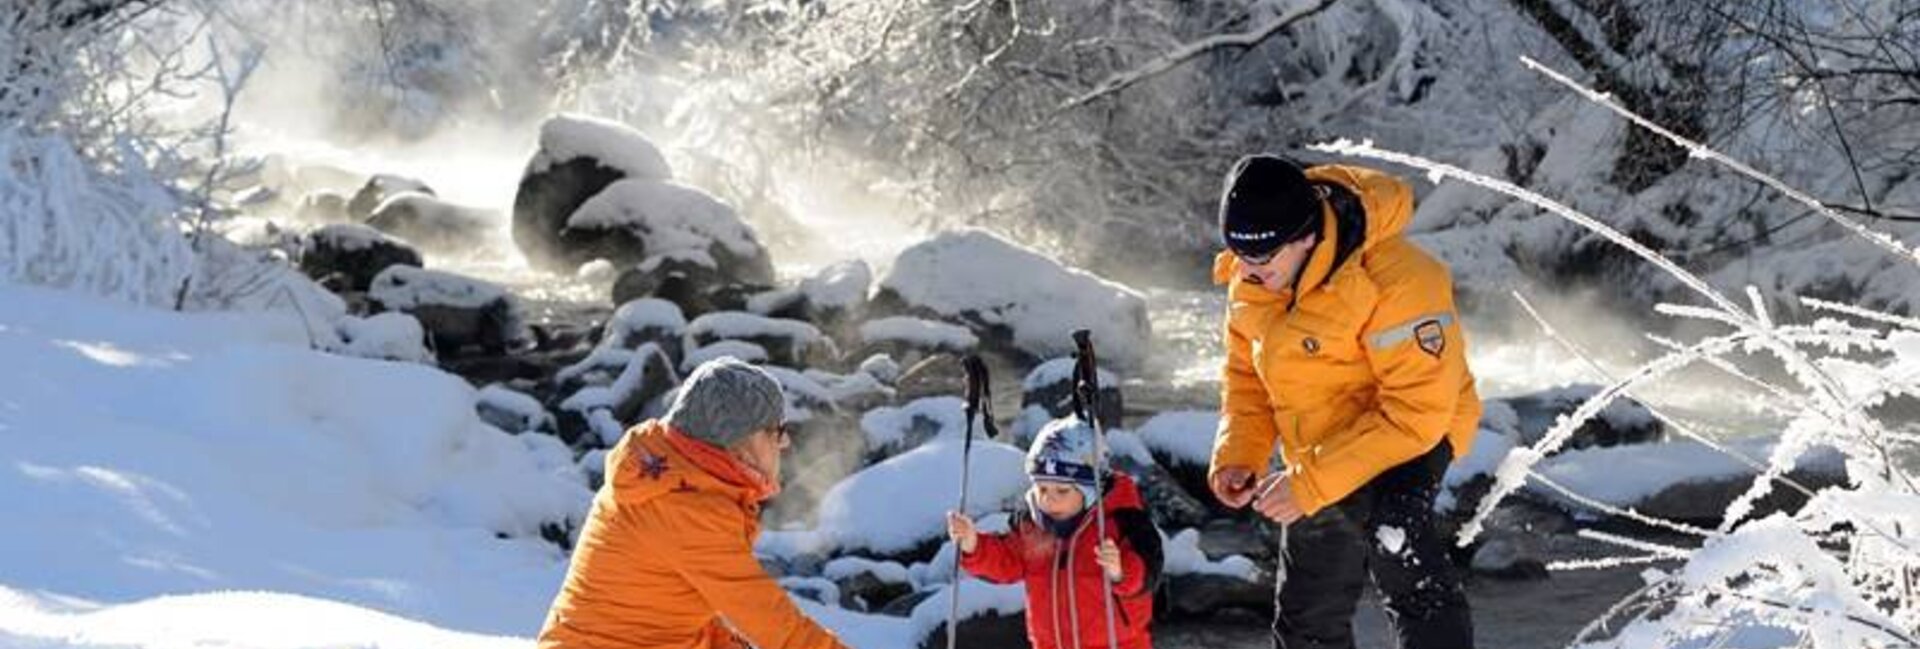 Rolle Pass - Skiing holiday Passo Rolle, winter holidays for families in the Italian Alps